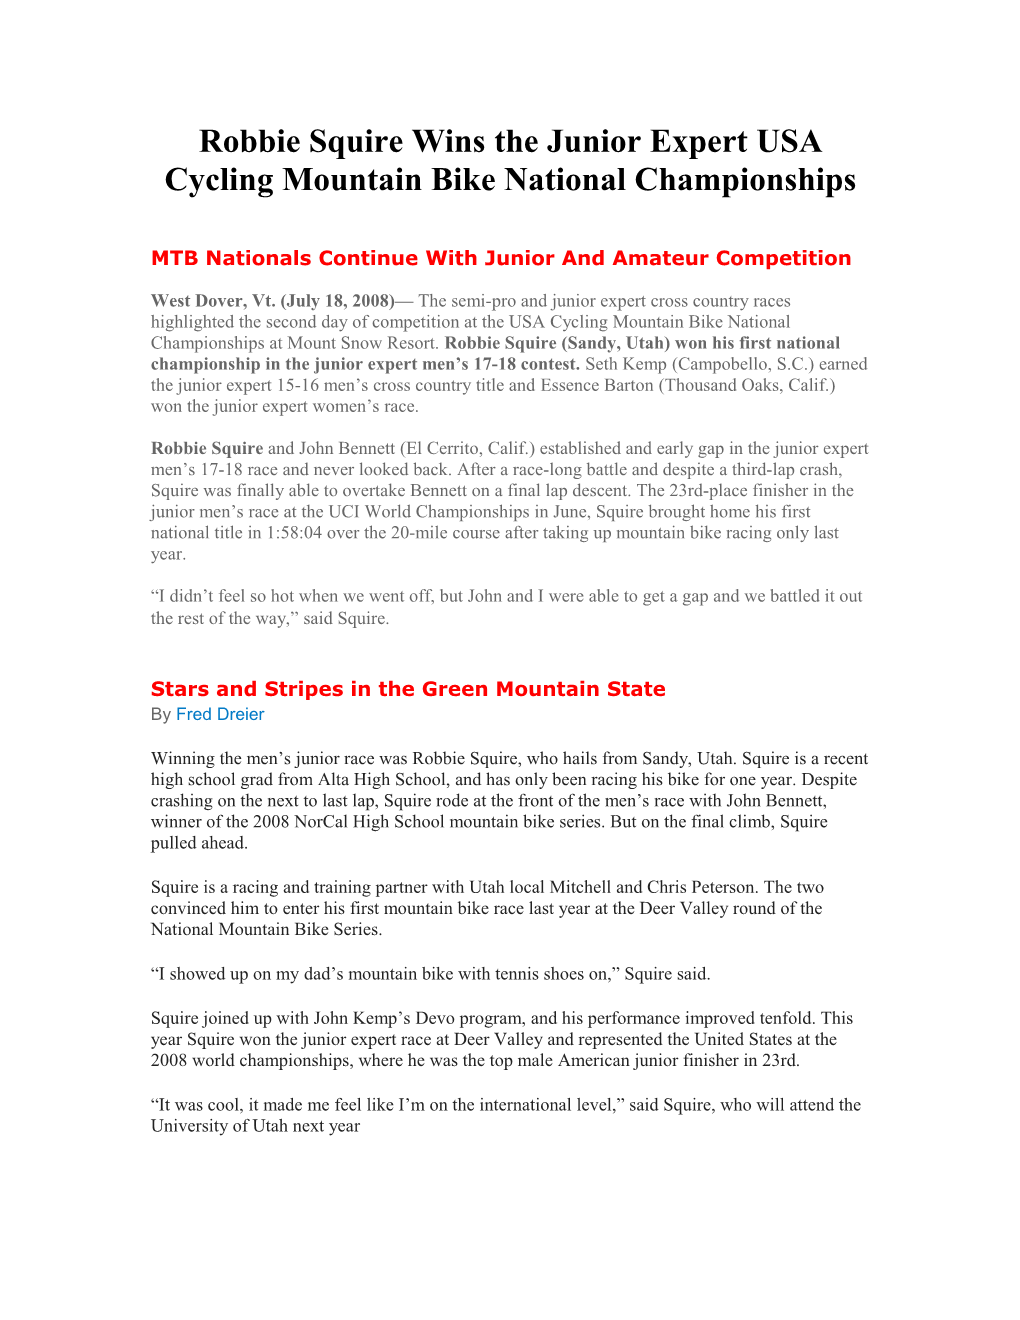 Robbie Squire Wins the Junior Expert USA Cycling Mountain Bike National Championships